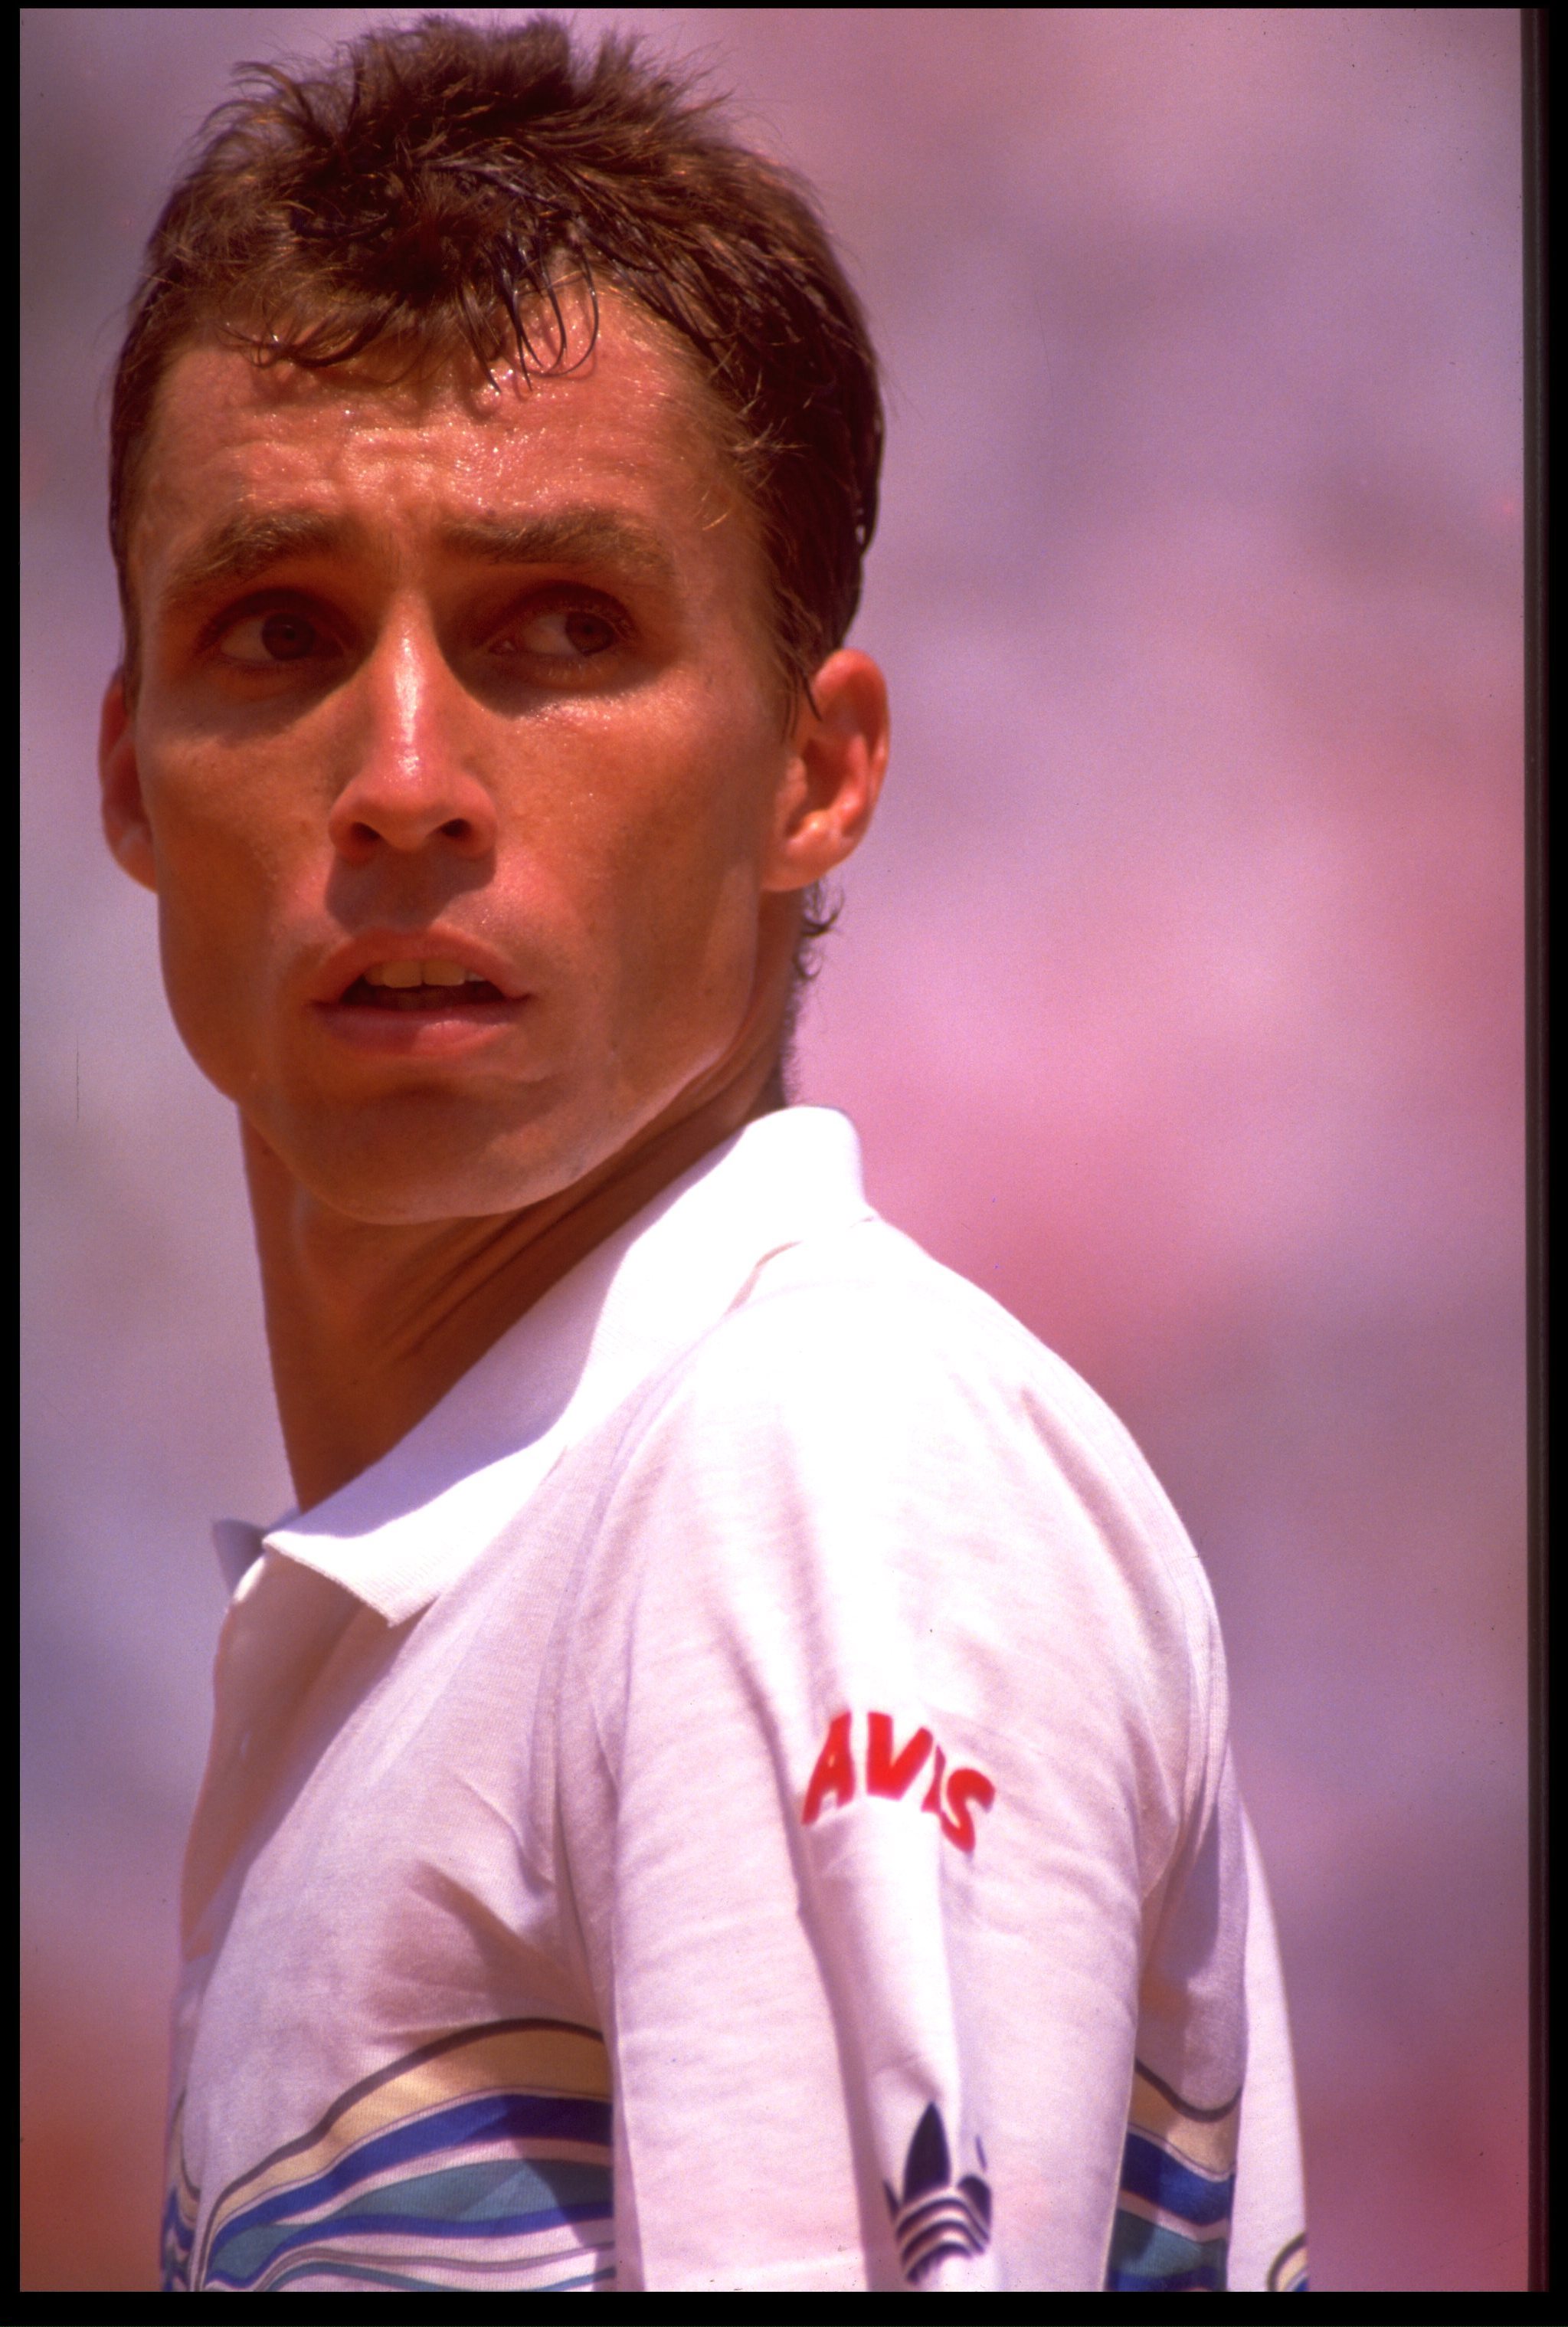 MAY 1987:  IVAN LENDL OF CZECHOSLOVAKIA LOOKING SURPRISED DURING A MATCH AT THE 1987 FRENCH OPEN AT ROLAND GARROS TENNIS CLUB IN PARIS.